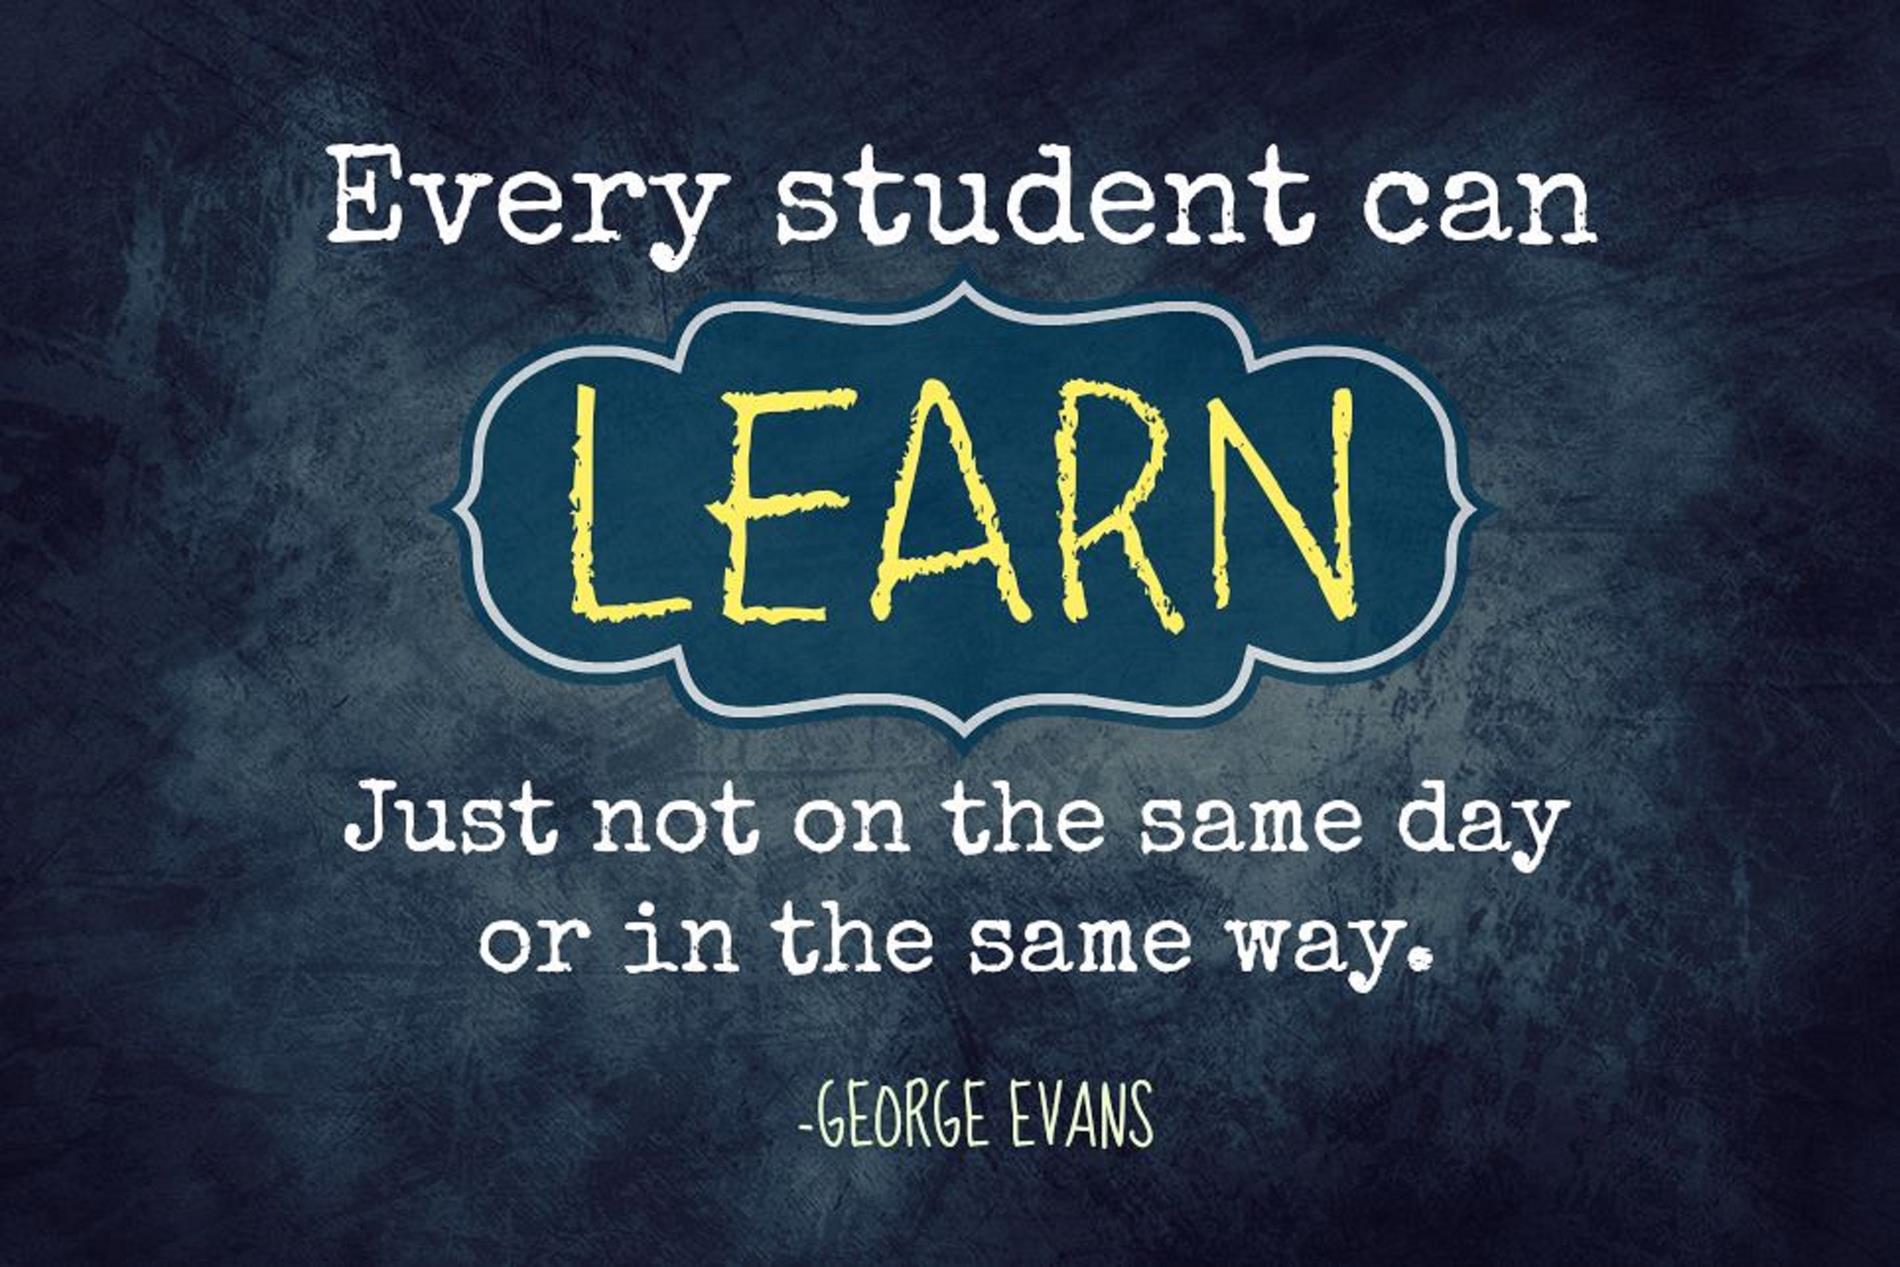 Every student can learn, just not on the same day or in the same way